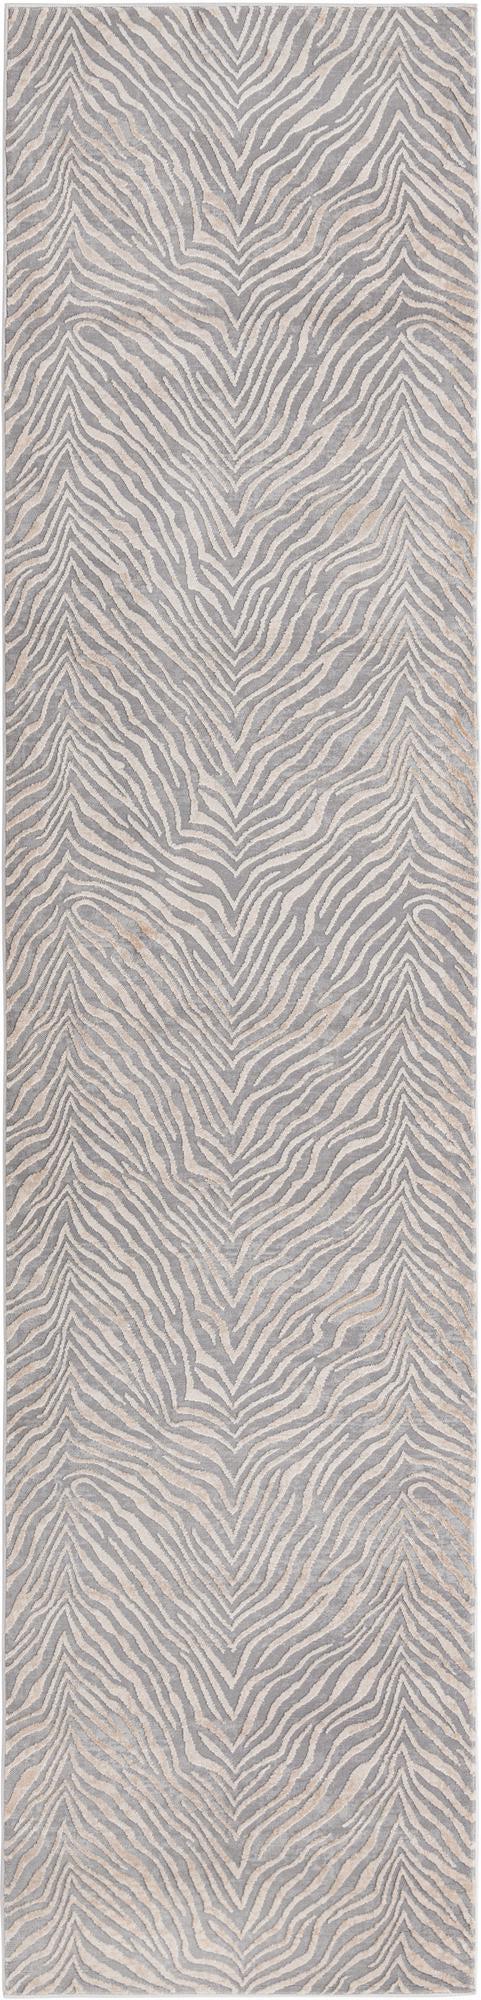 rugpal vrego animal inspirations area rug collection